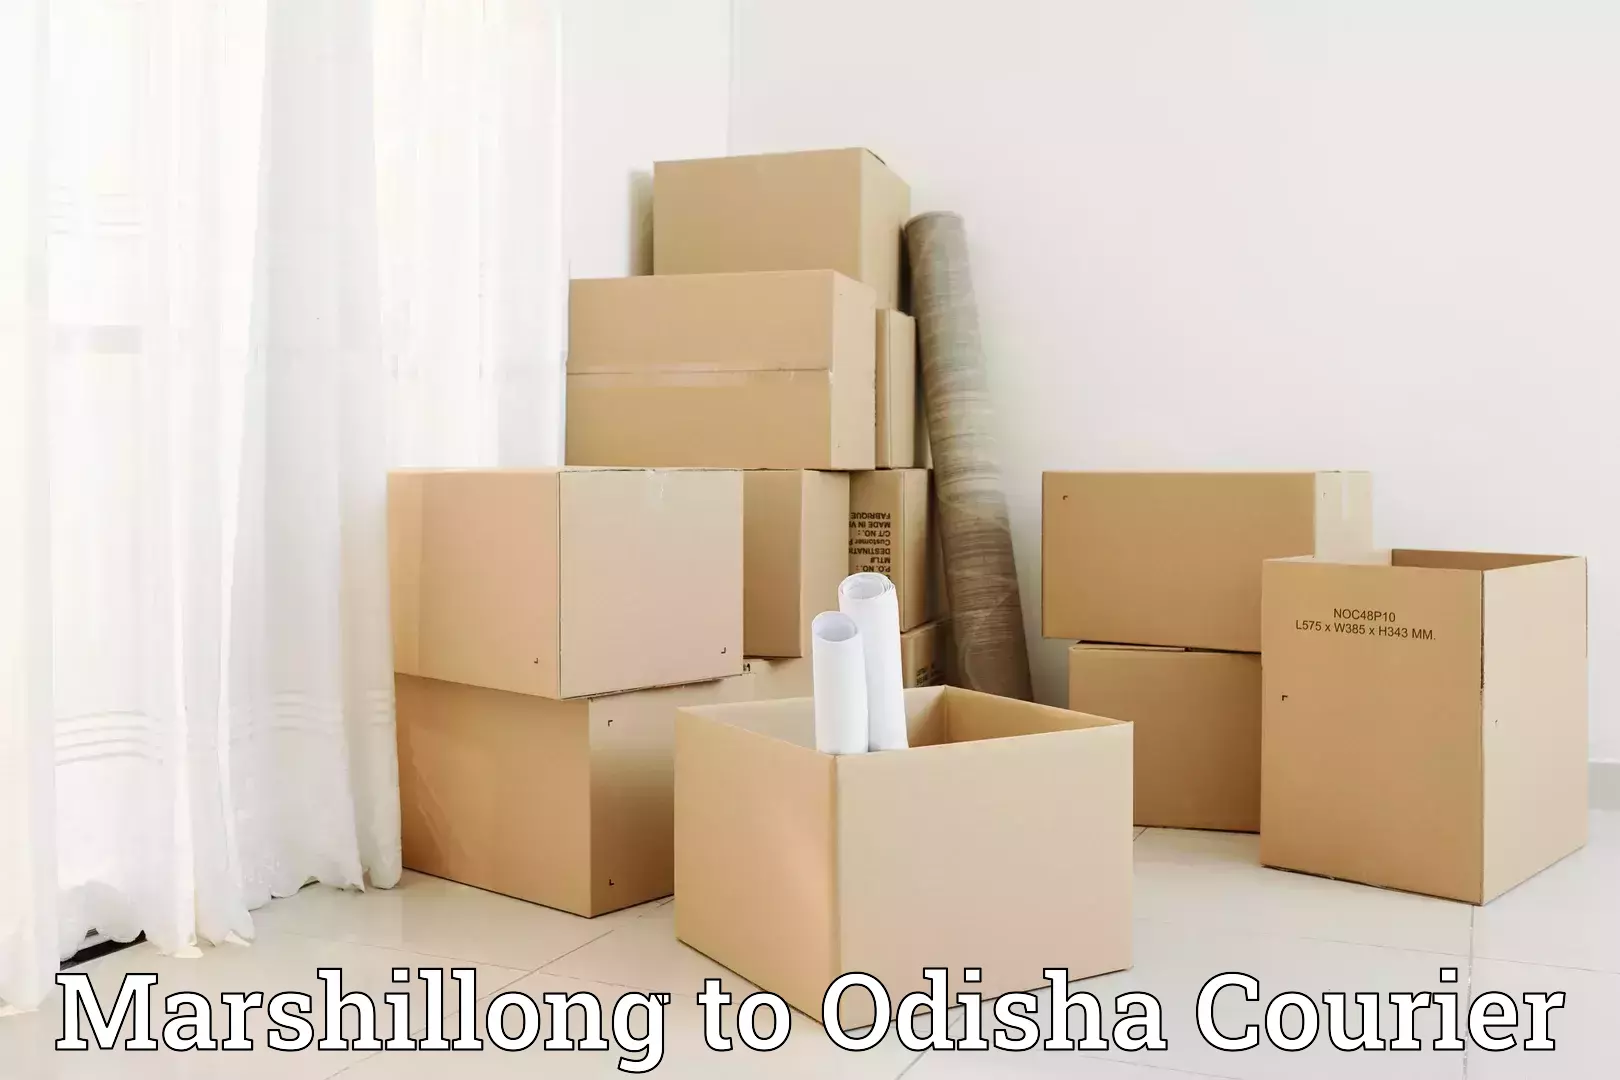 Trusted relocation services Marshillong to Swampatna